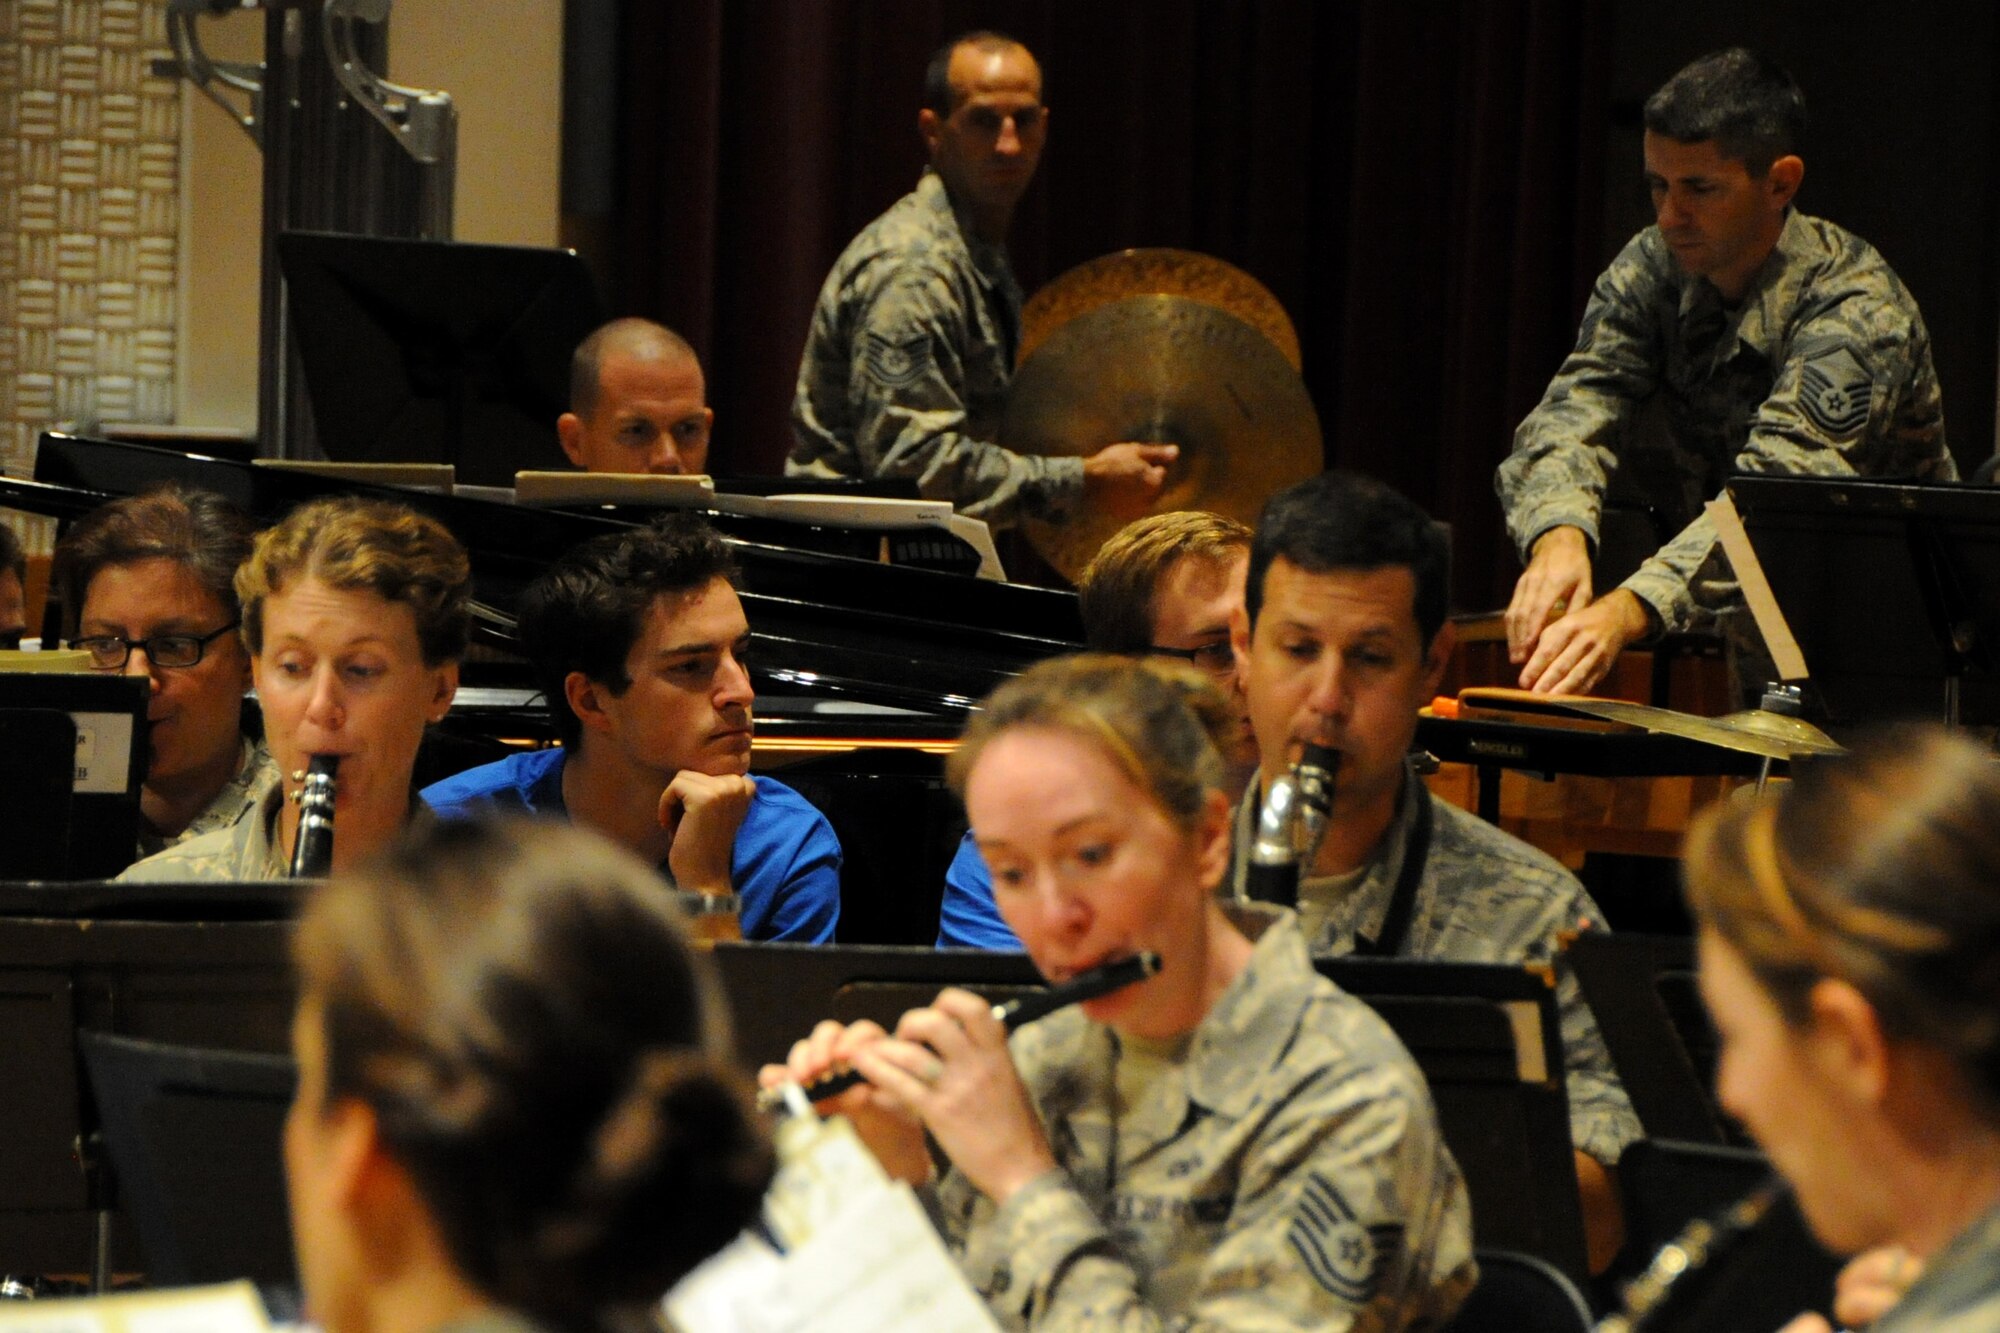 Students from Duke University watch the U.S. Air Force Concert Band rehearse at Joint Base Anacostia-Bolling, Washington D.C., Oct. 13, 2015. The members of Duke University’s Wind Symphony visited the U.S. Air Force Band today for an immersion in music and Air Force culture. The students attended Masterclass sessions led by performers from the Band to further develop mastery of their instruments before watching the Concert Band’s final rehearsal before their fall tour. (U.S. Air Force photo/Staff Sgt. Matt Davis)